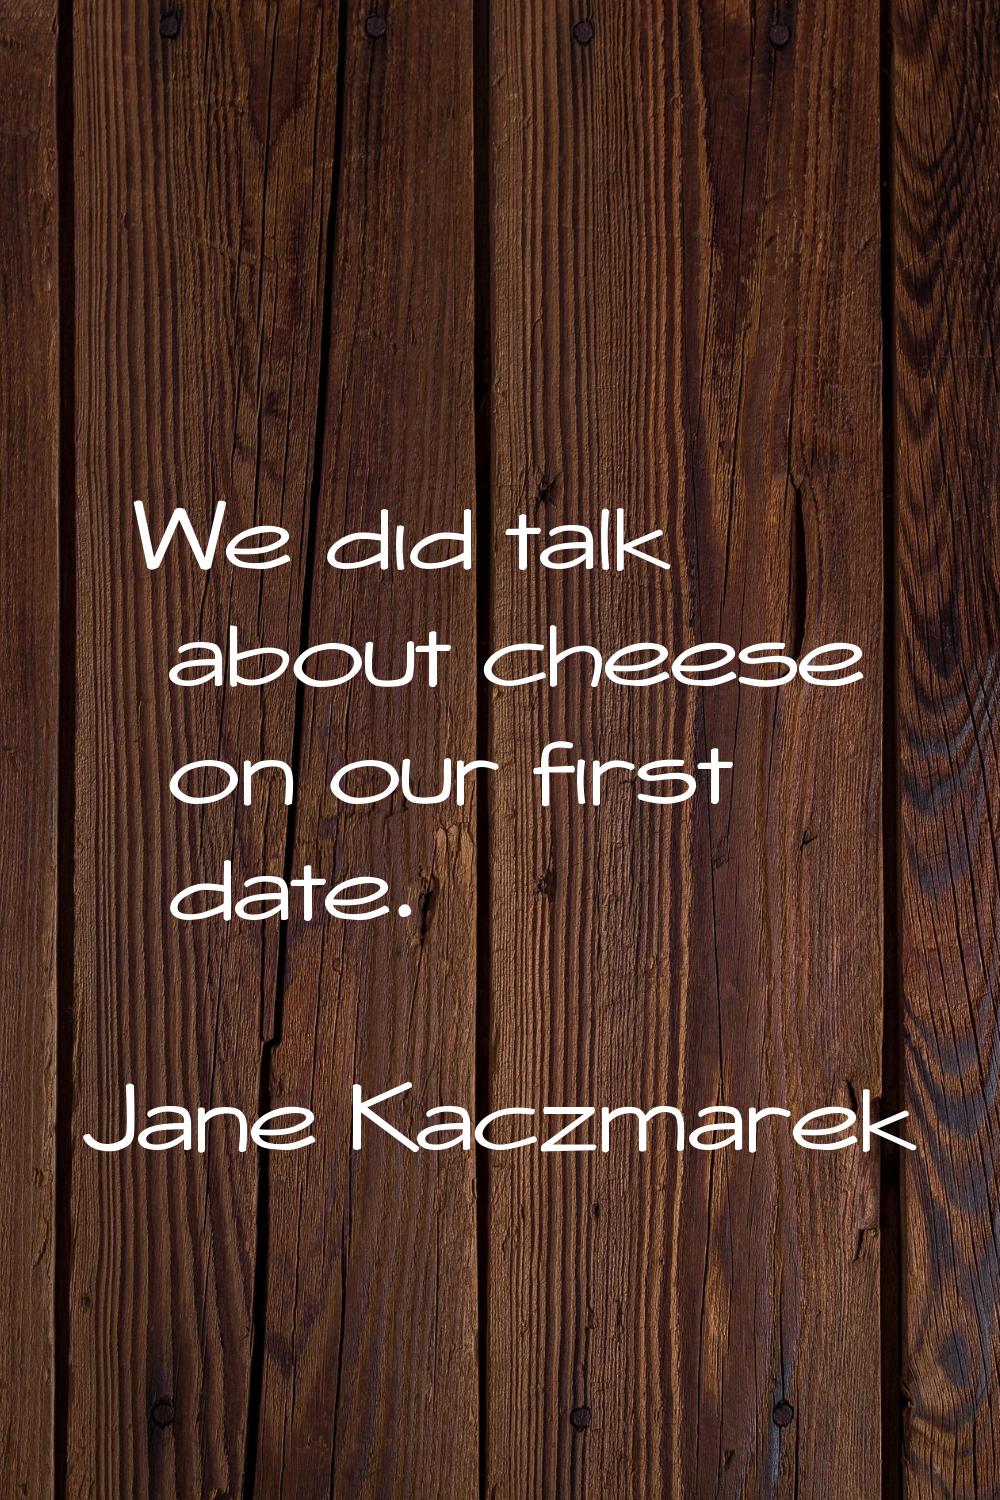 We did talk about cheese on our first date.